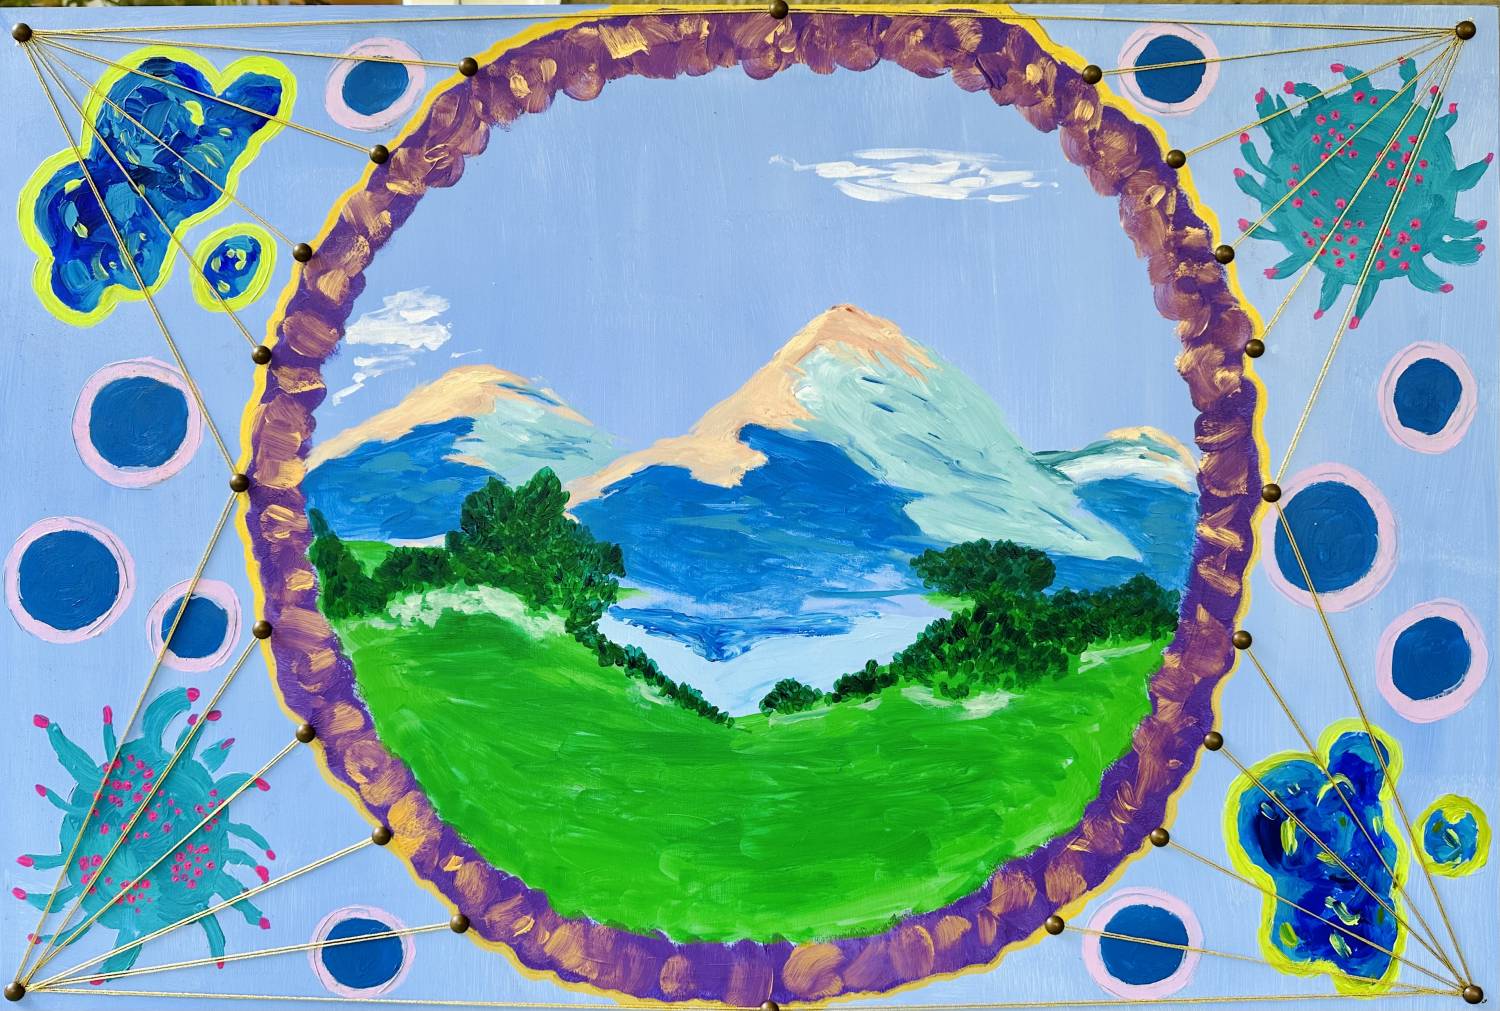 Artist Mignon Dupepe's piece, “Porthole of Peace,” which features a mountain range seen through a porthole.